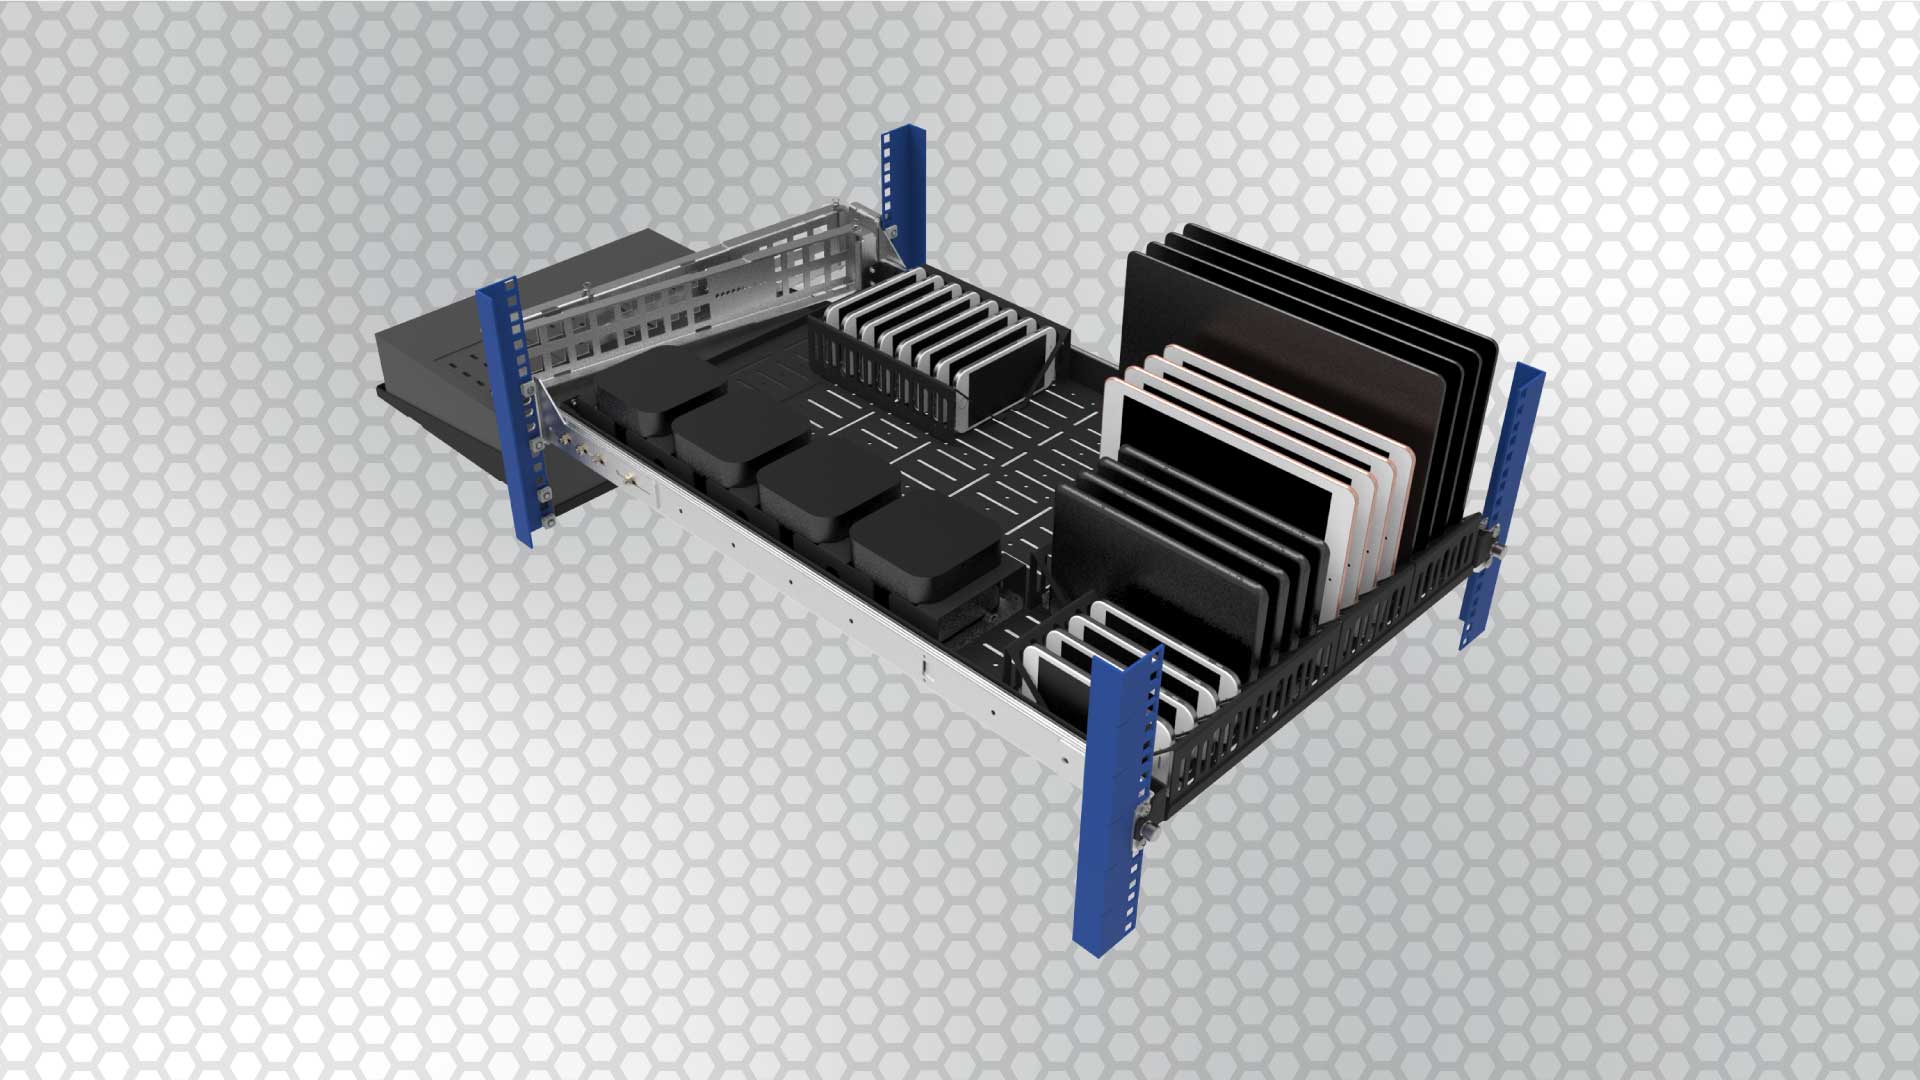 racksolutions modular shelf for test lab devices